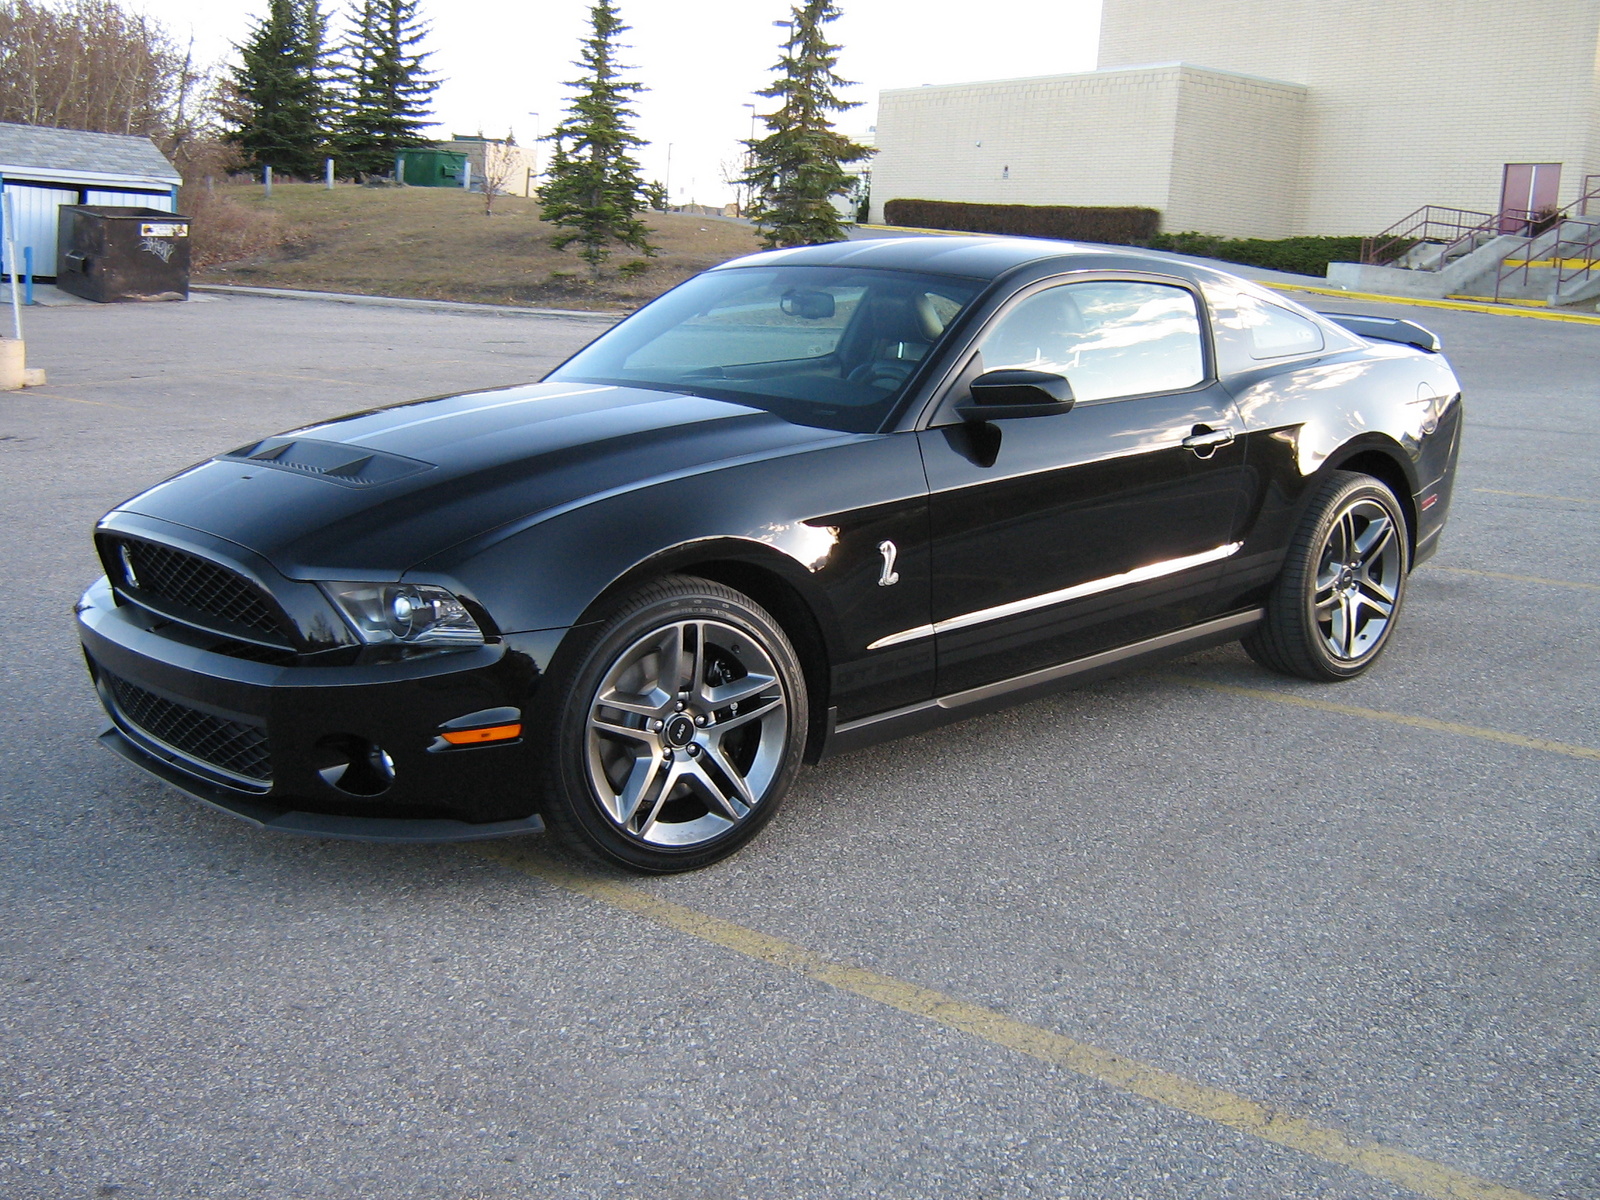 2010 Ford Shelby GT500 Coupe - Pictures - 2010 Ford Shelby GT500 ...